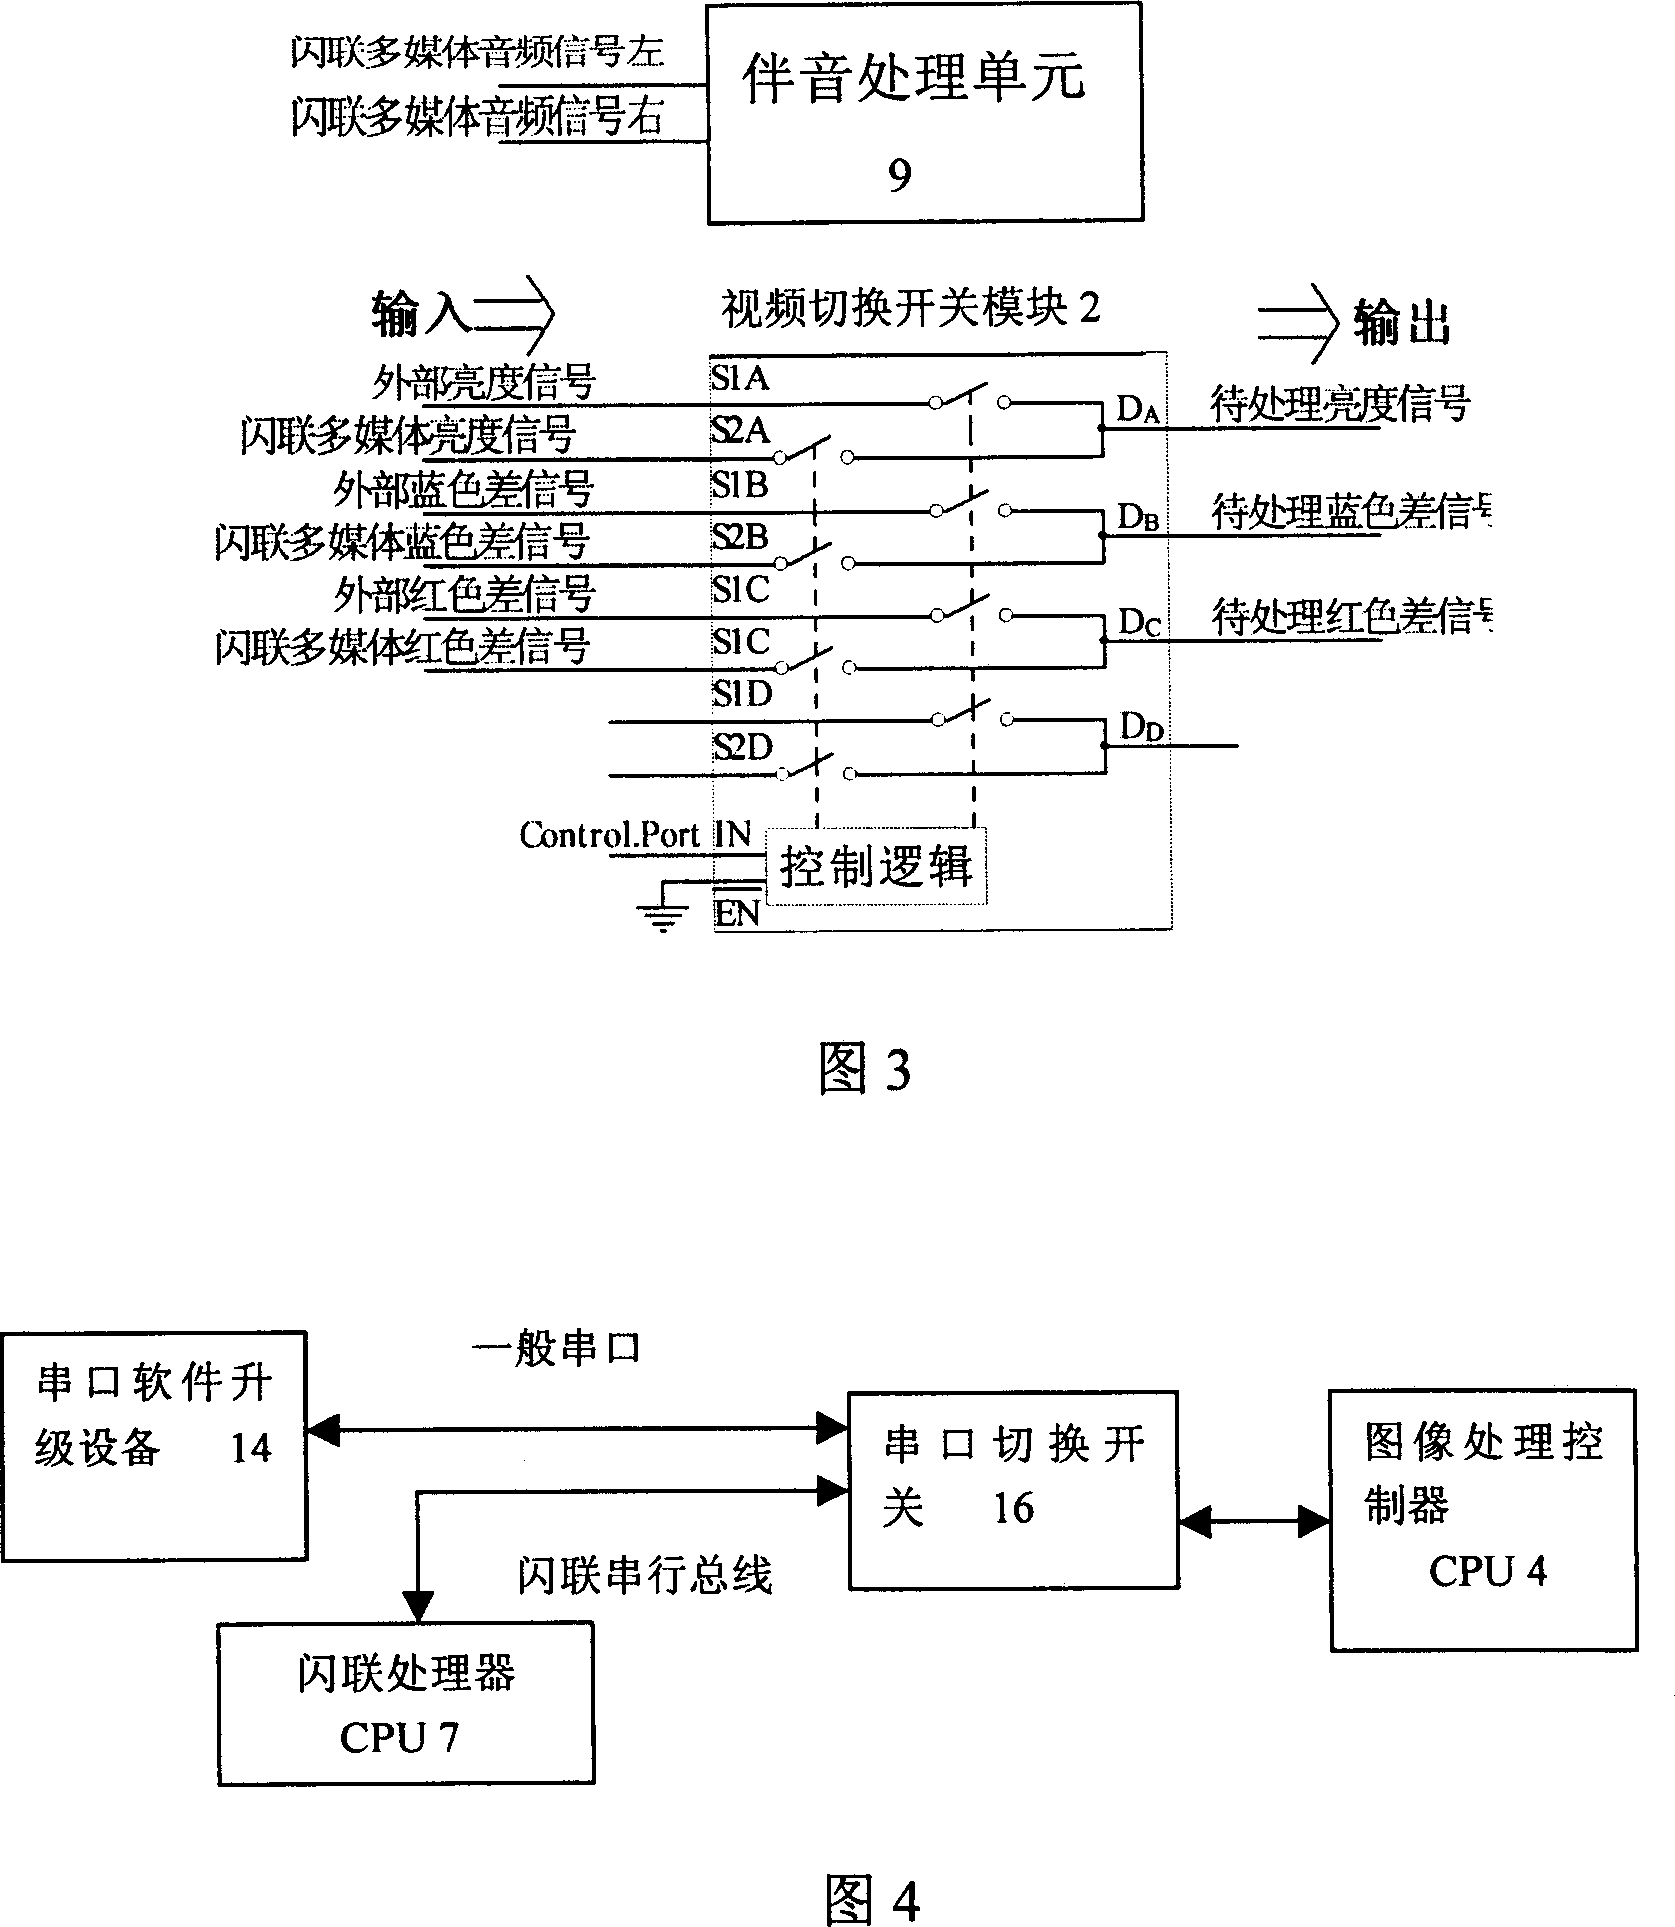 Television receiver with wireless transmission function